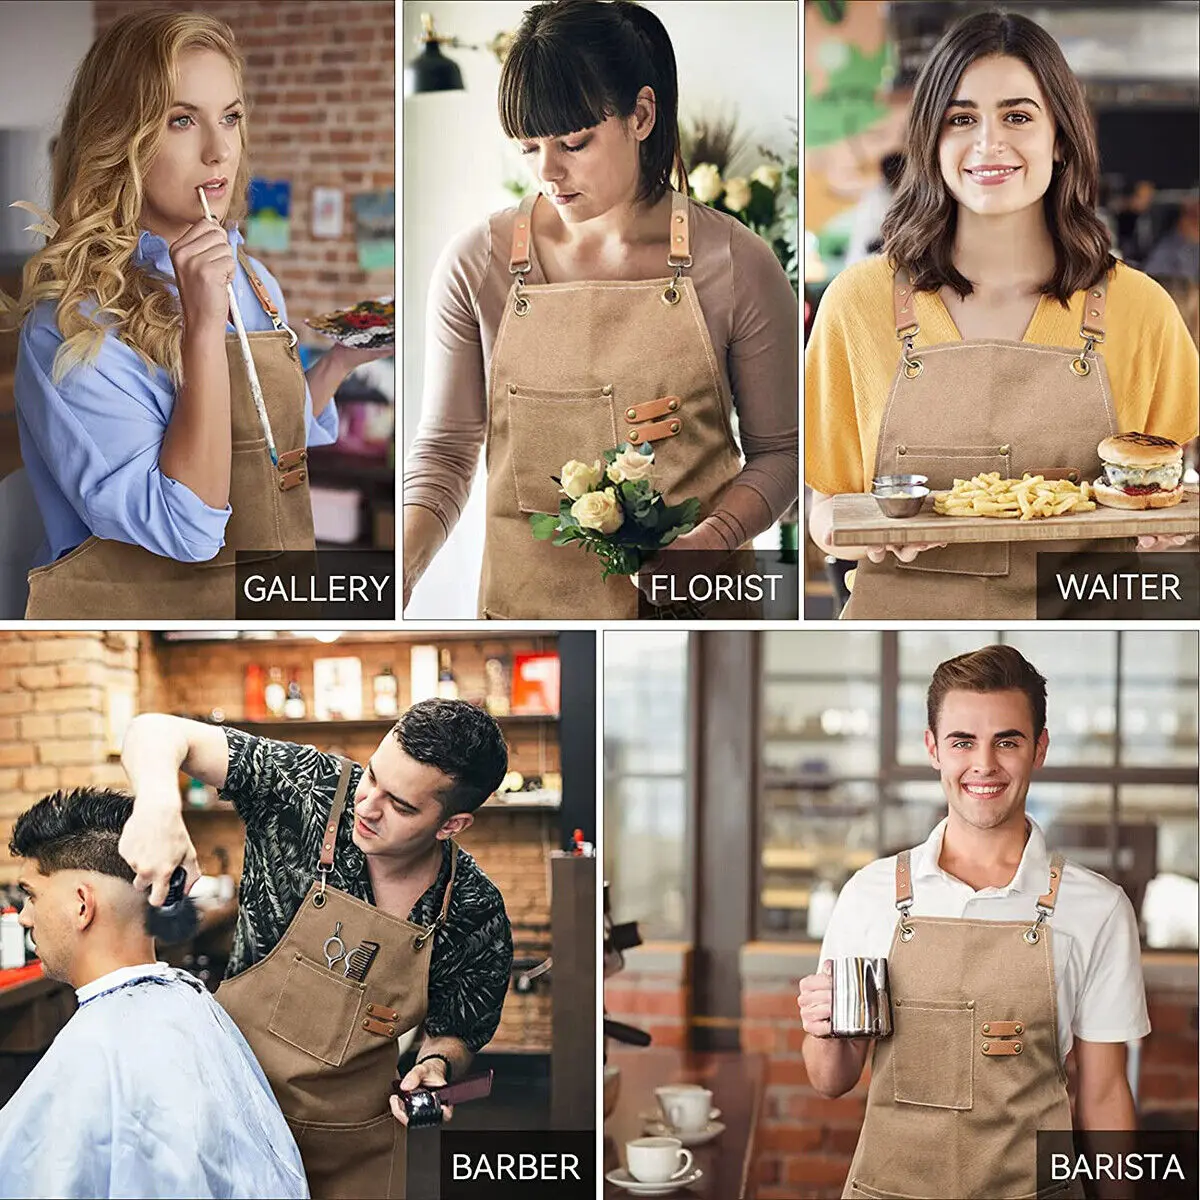 https://ae01.alicdn.com/kf/S2225eb40bf9844889b1fe565f30fb2d7L/New-Fashion-Canvas-Kitchen-Aprons-For-Woman-Men-Chef-Work-Apron-For-Grill-Restaurant-Bar-Shop.jpg